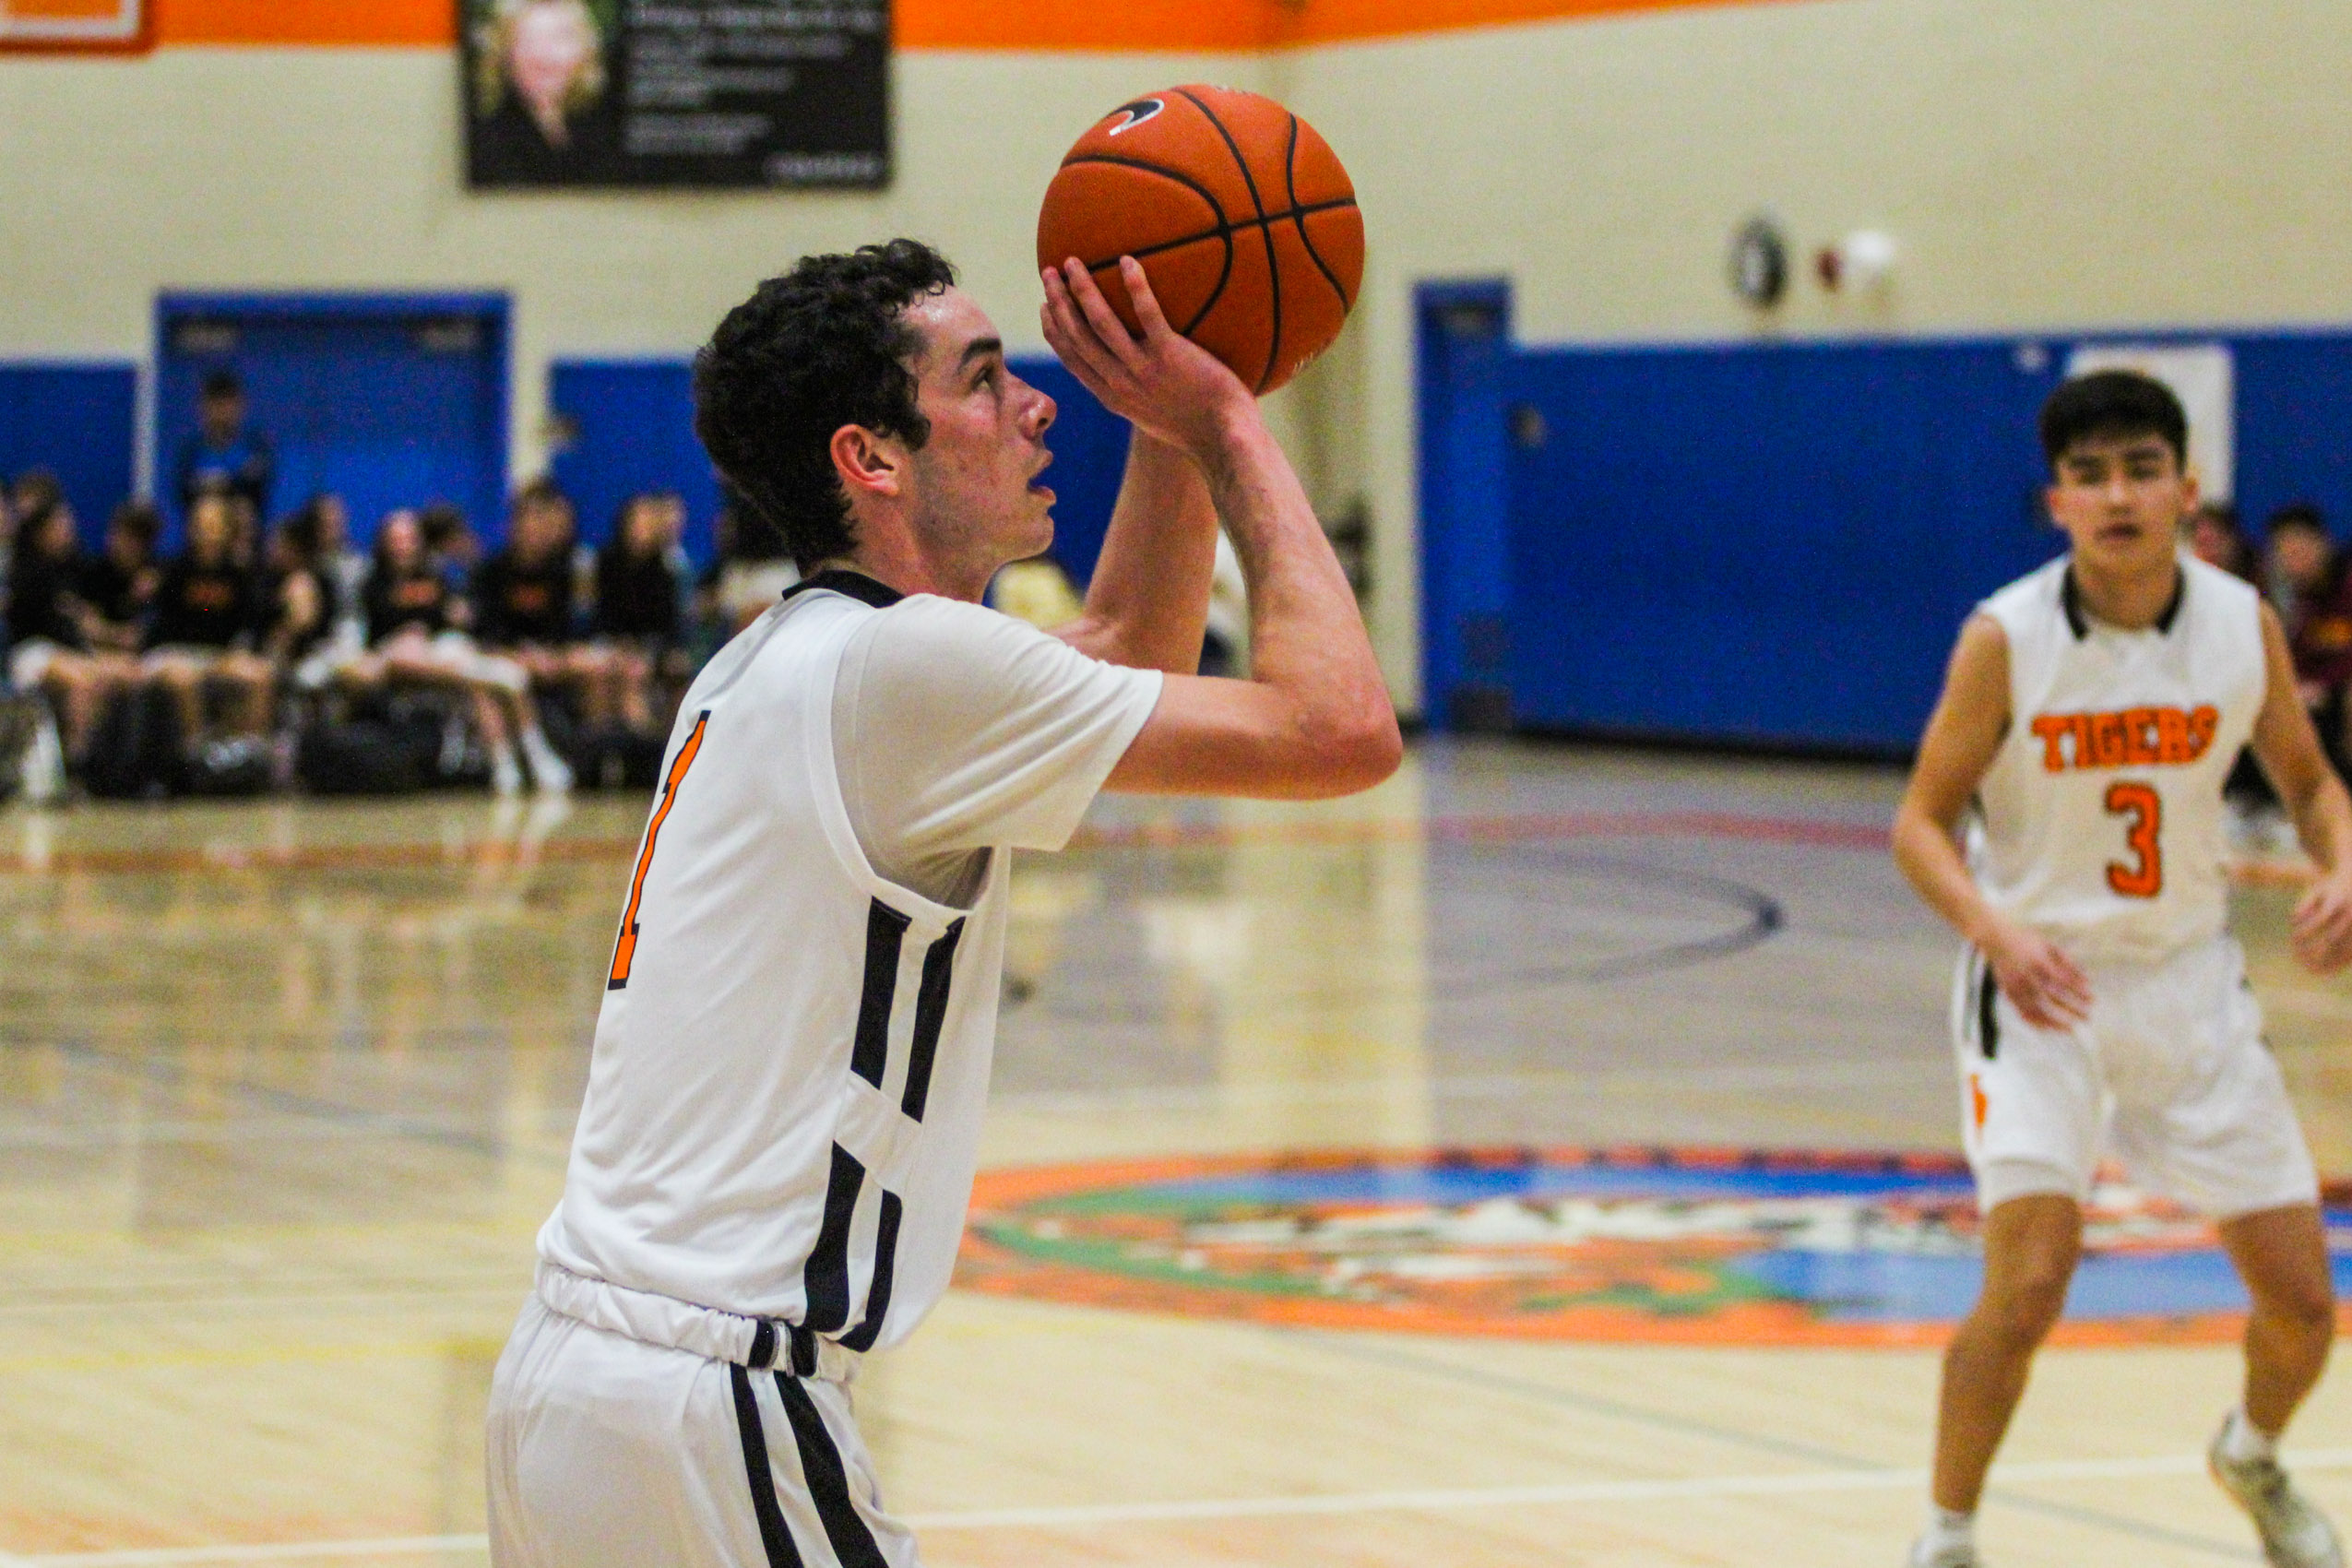 Thumbnail for Boys basketball suffers defeat against La Cañada in home opener